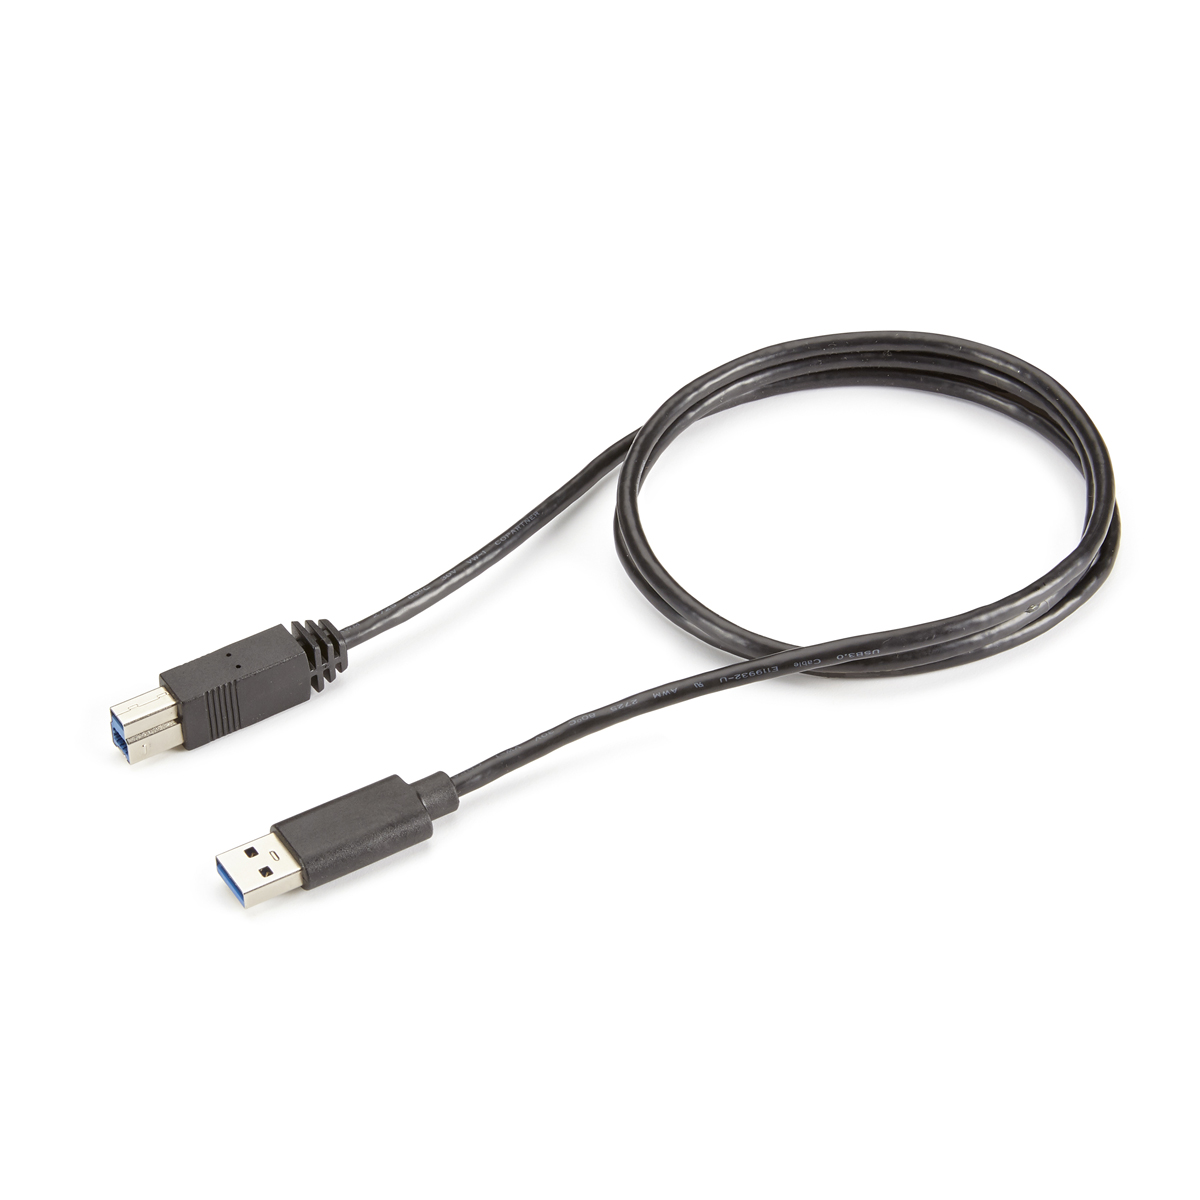 Product Photo - USB Cable